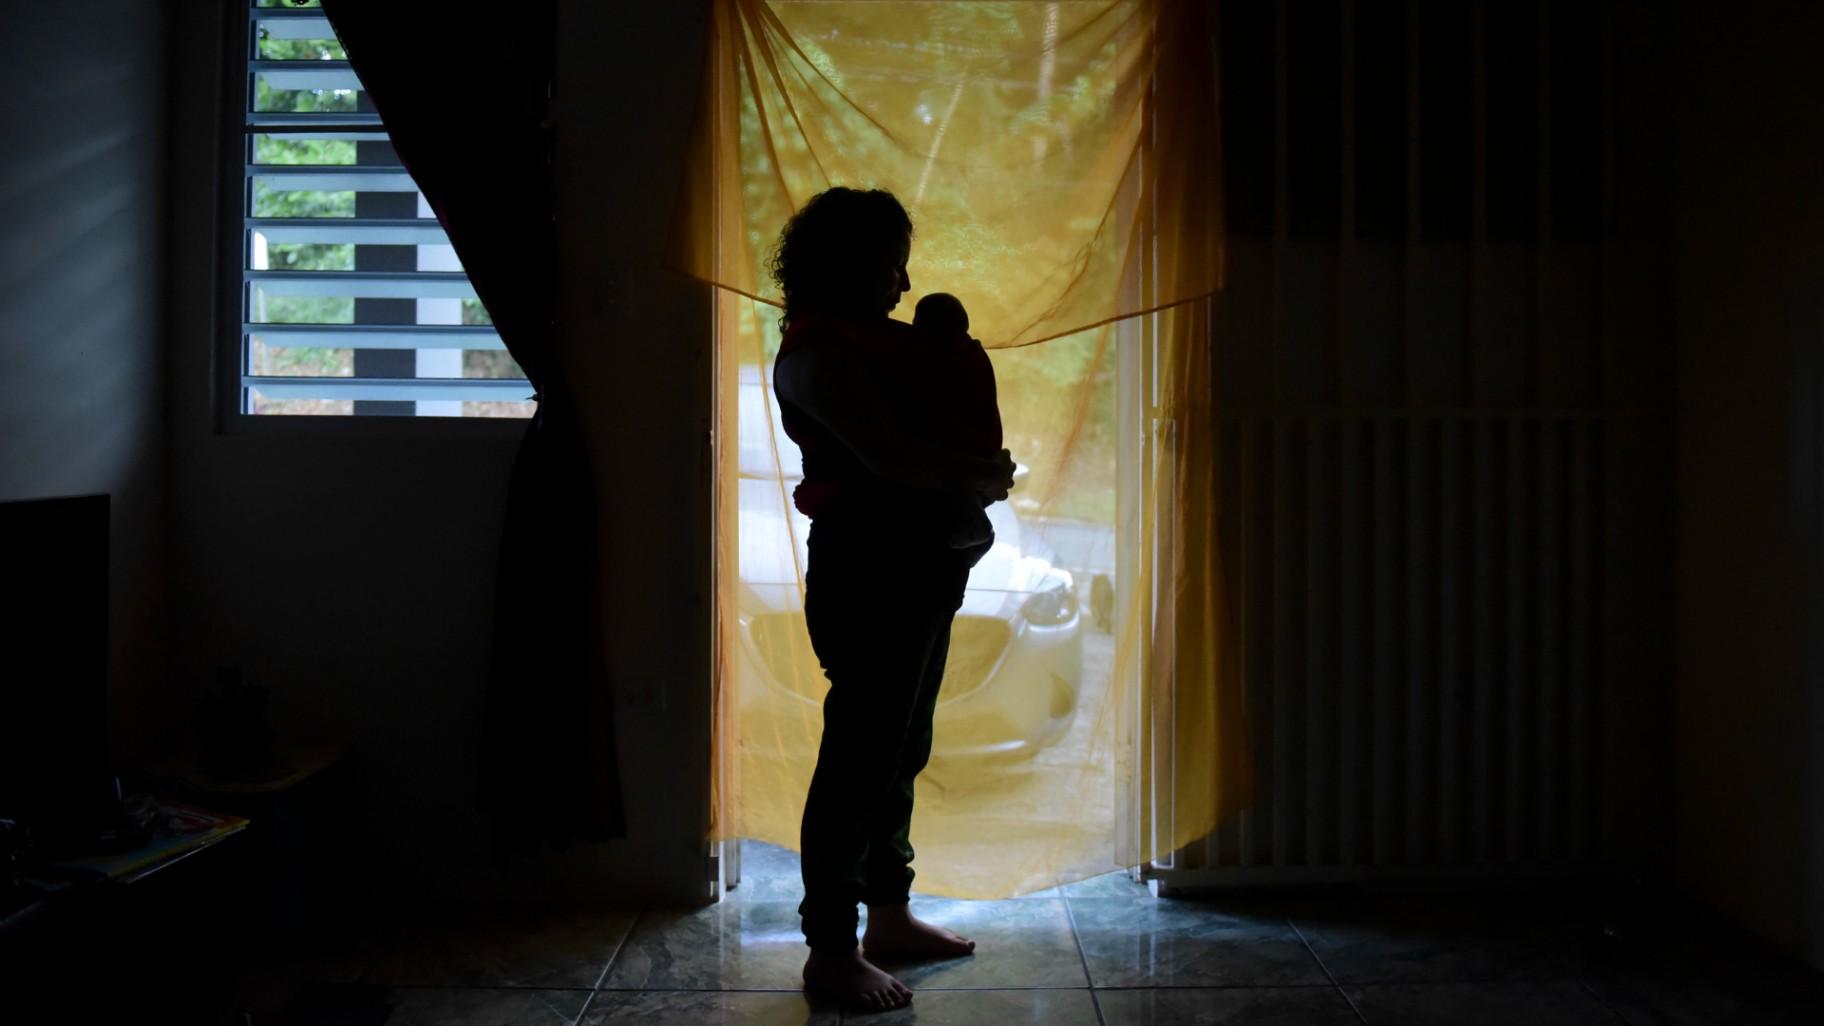 Michelle Flandez stands in her home with her two-month-old son Inti Perez, woh is diagnosed with microcephaly linked to the mosquito-borne Zika virus, in Bayamon, Puerto Rico on Dec. 16, 2016. (AP Photo / Carlos Giusti, File)